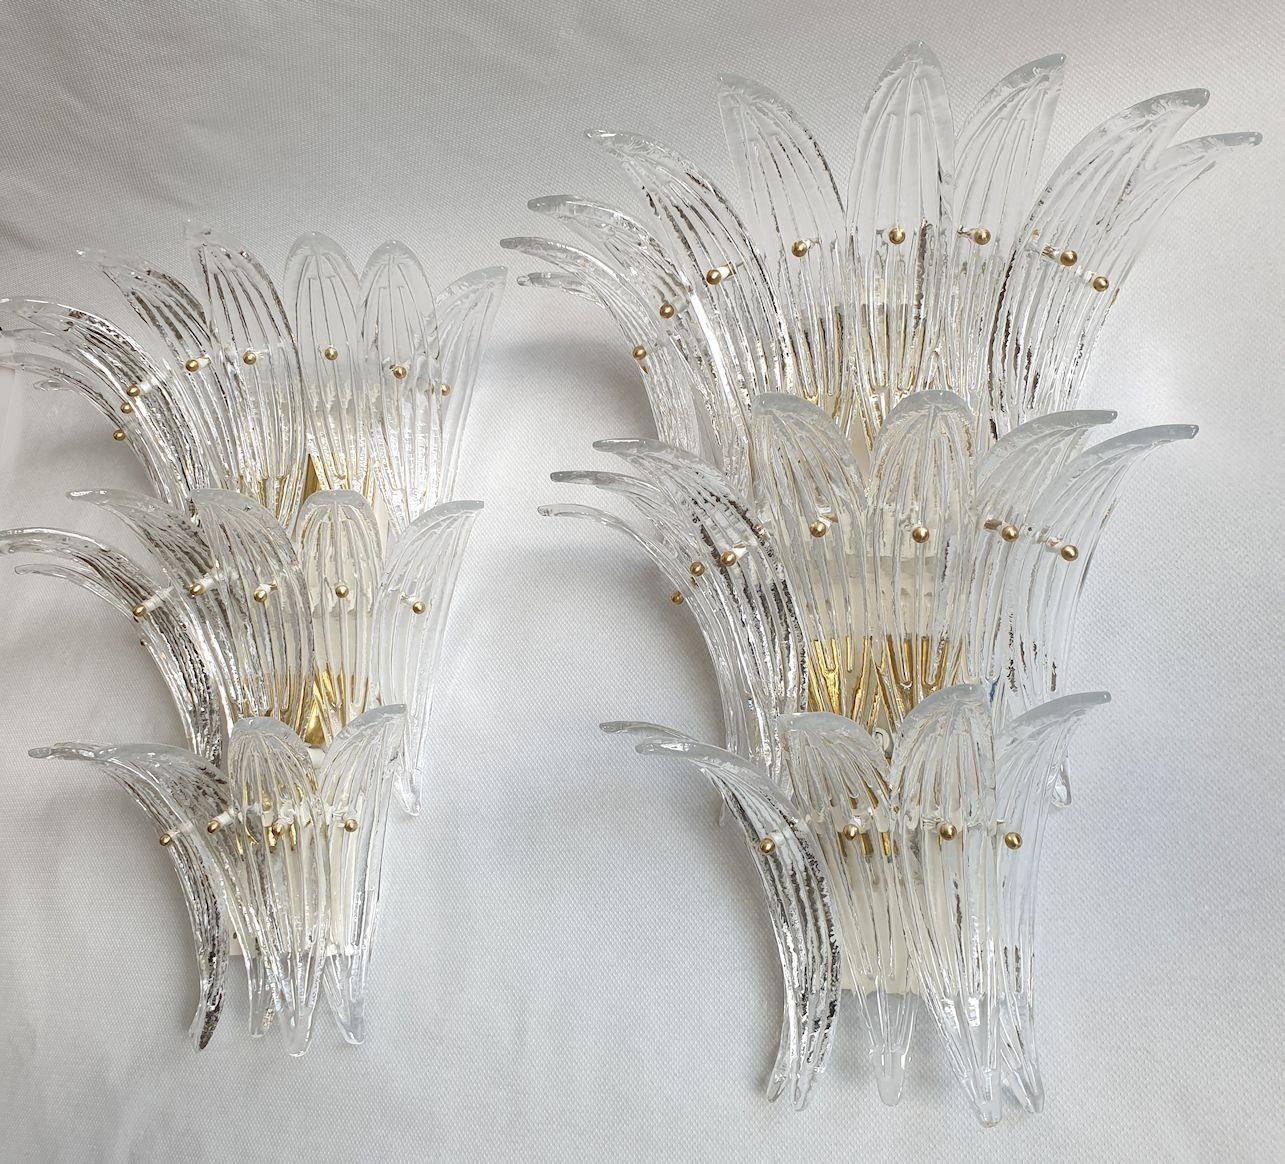 Pair of large Mid-Century Modern clear Murano glass Palmette sconces, Barovier and Toso style, Italy 1970s.
The large three tier sconces are made of 21 Palmette of handmade Murano glass each.
The back plate is painted white and it has with brass